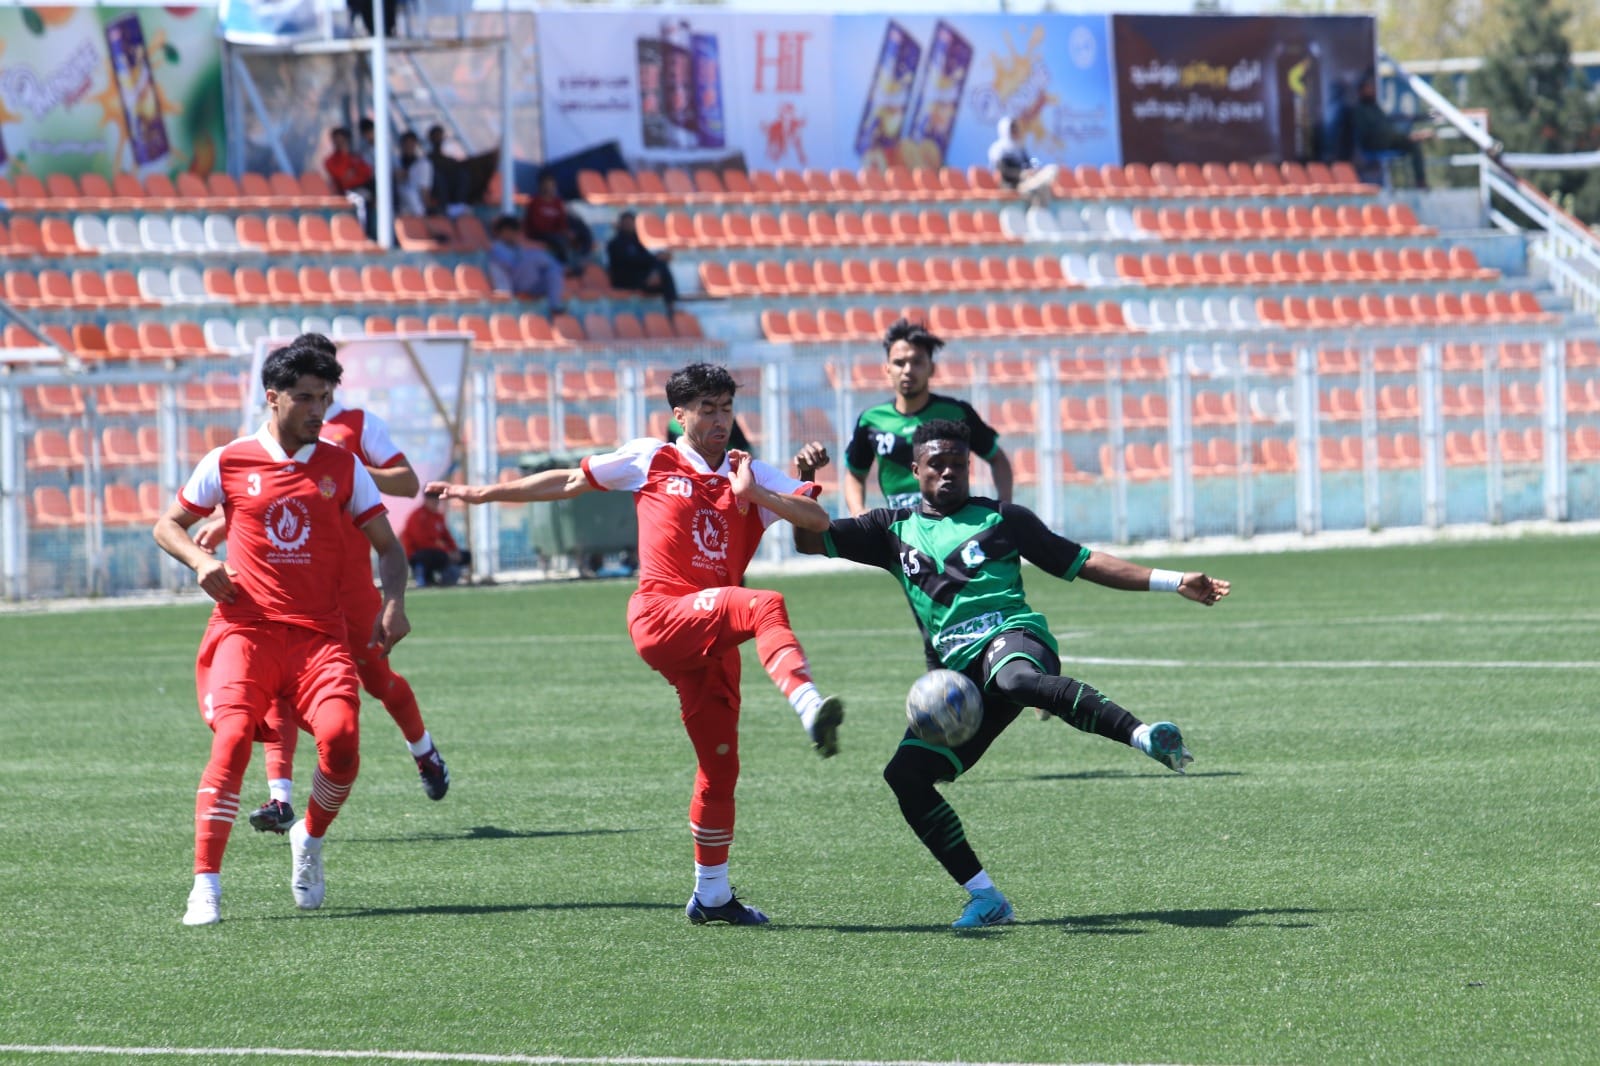 In the continuation of the National Football Champions League, in the 9th and 10th games of this league, the Attack Energy teams played against Sorkh Pushan Khawfi and the Esteghlal Kabul team played against the Moj Sahil team.